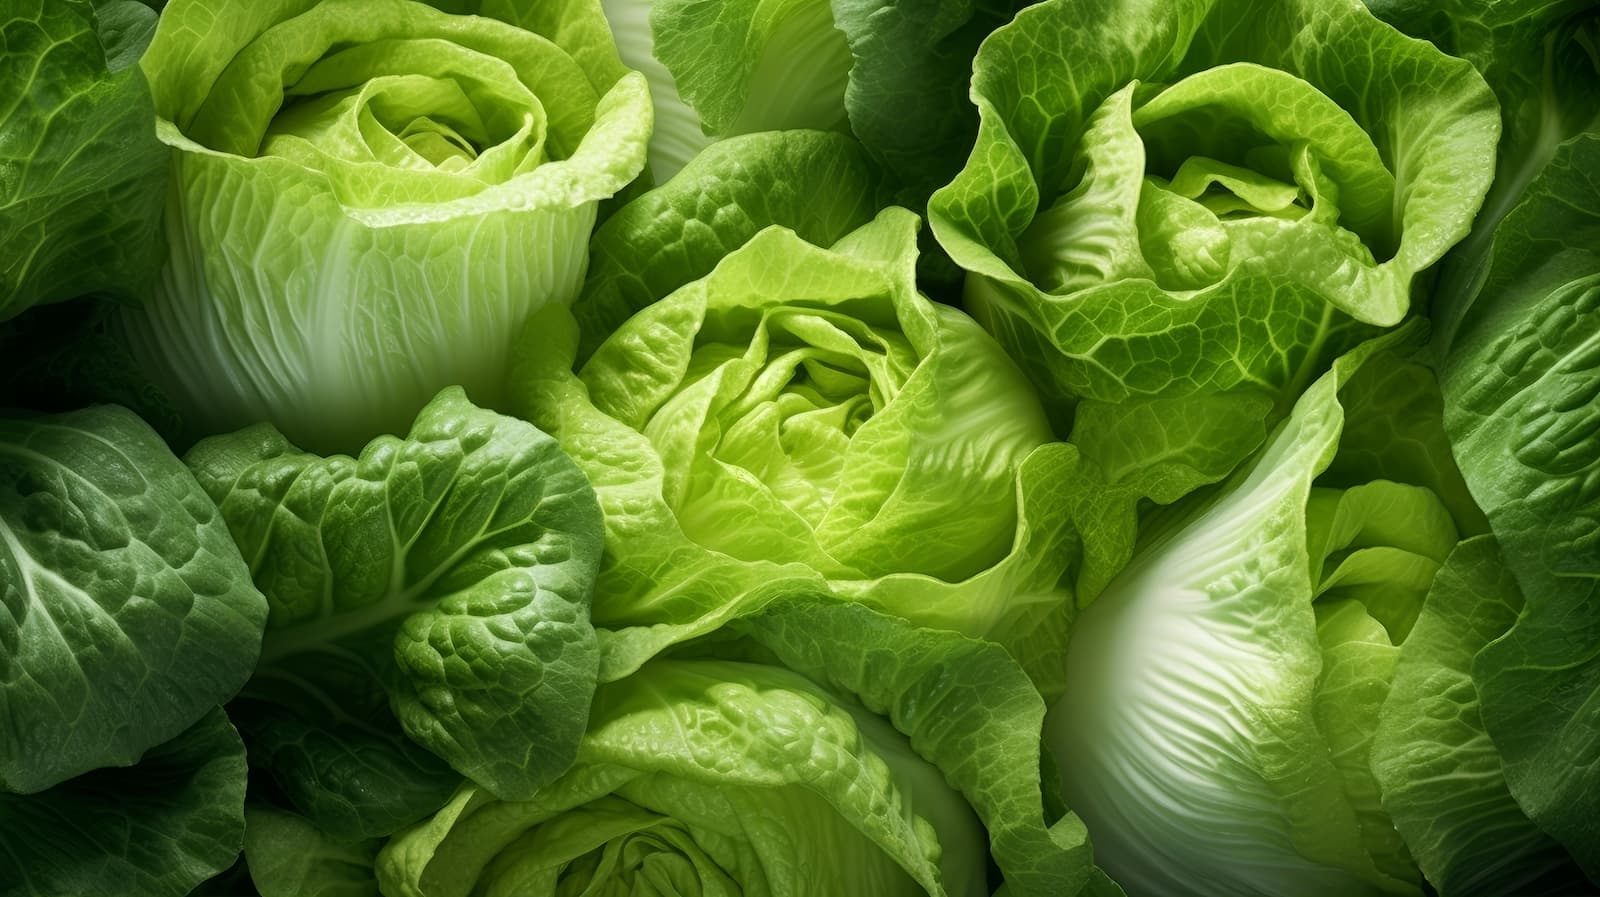 Lettuce, a vegetable that will help you stay hydrated this summer